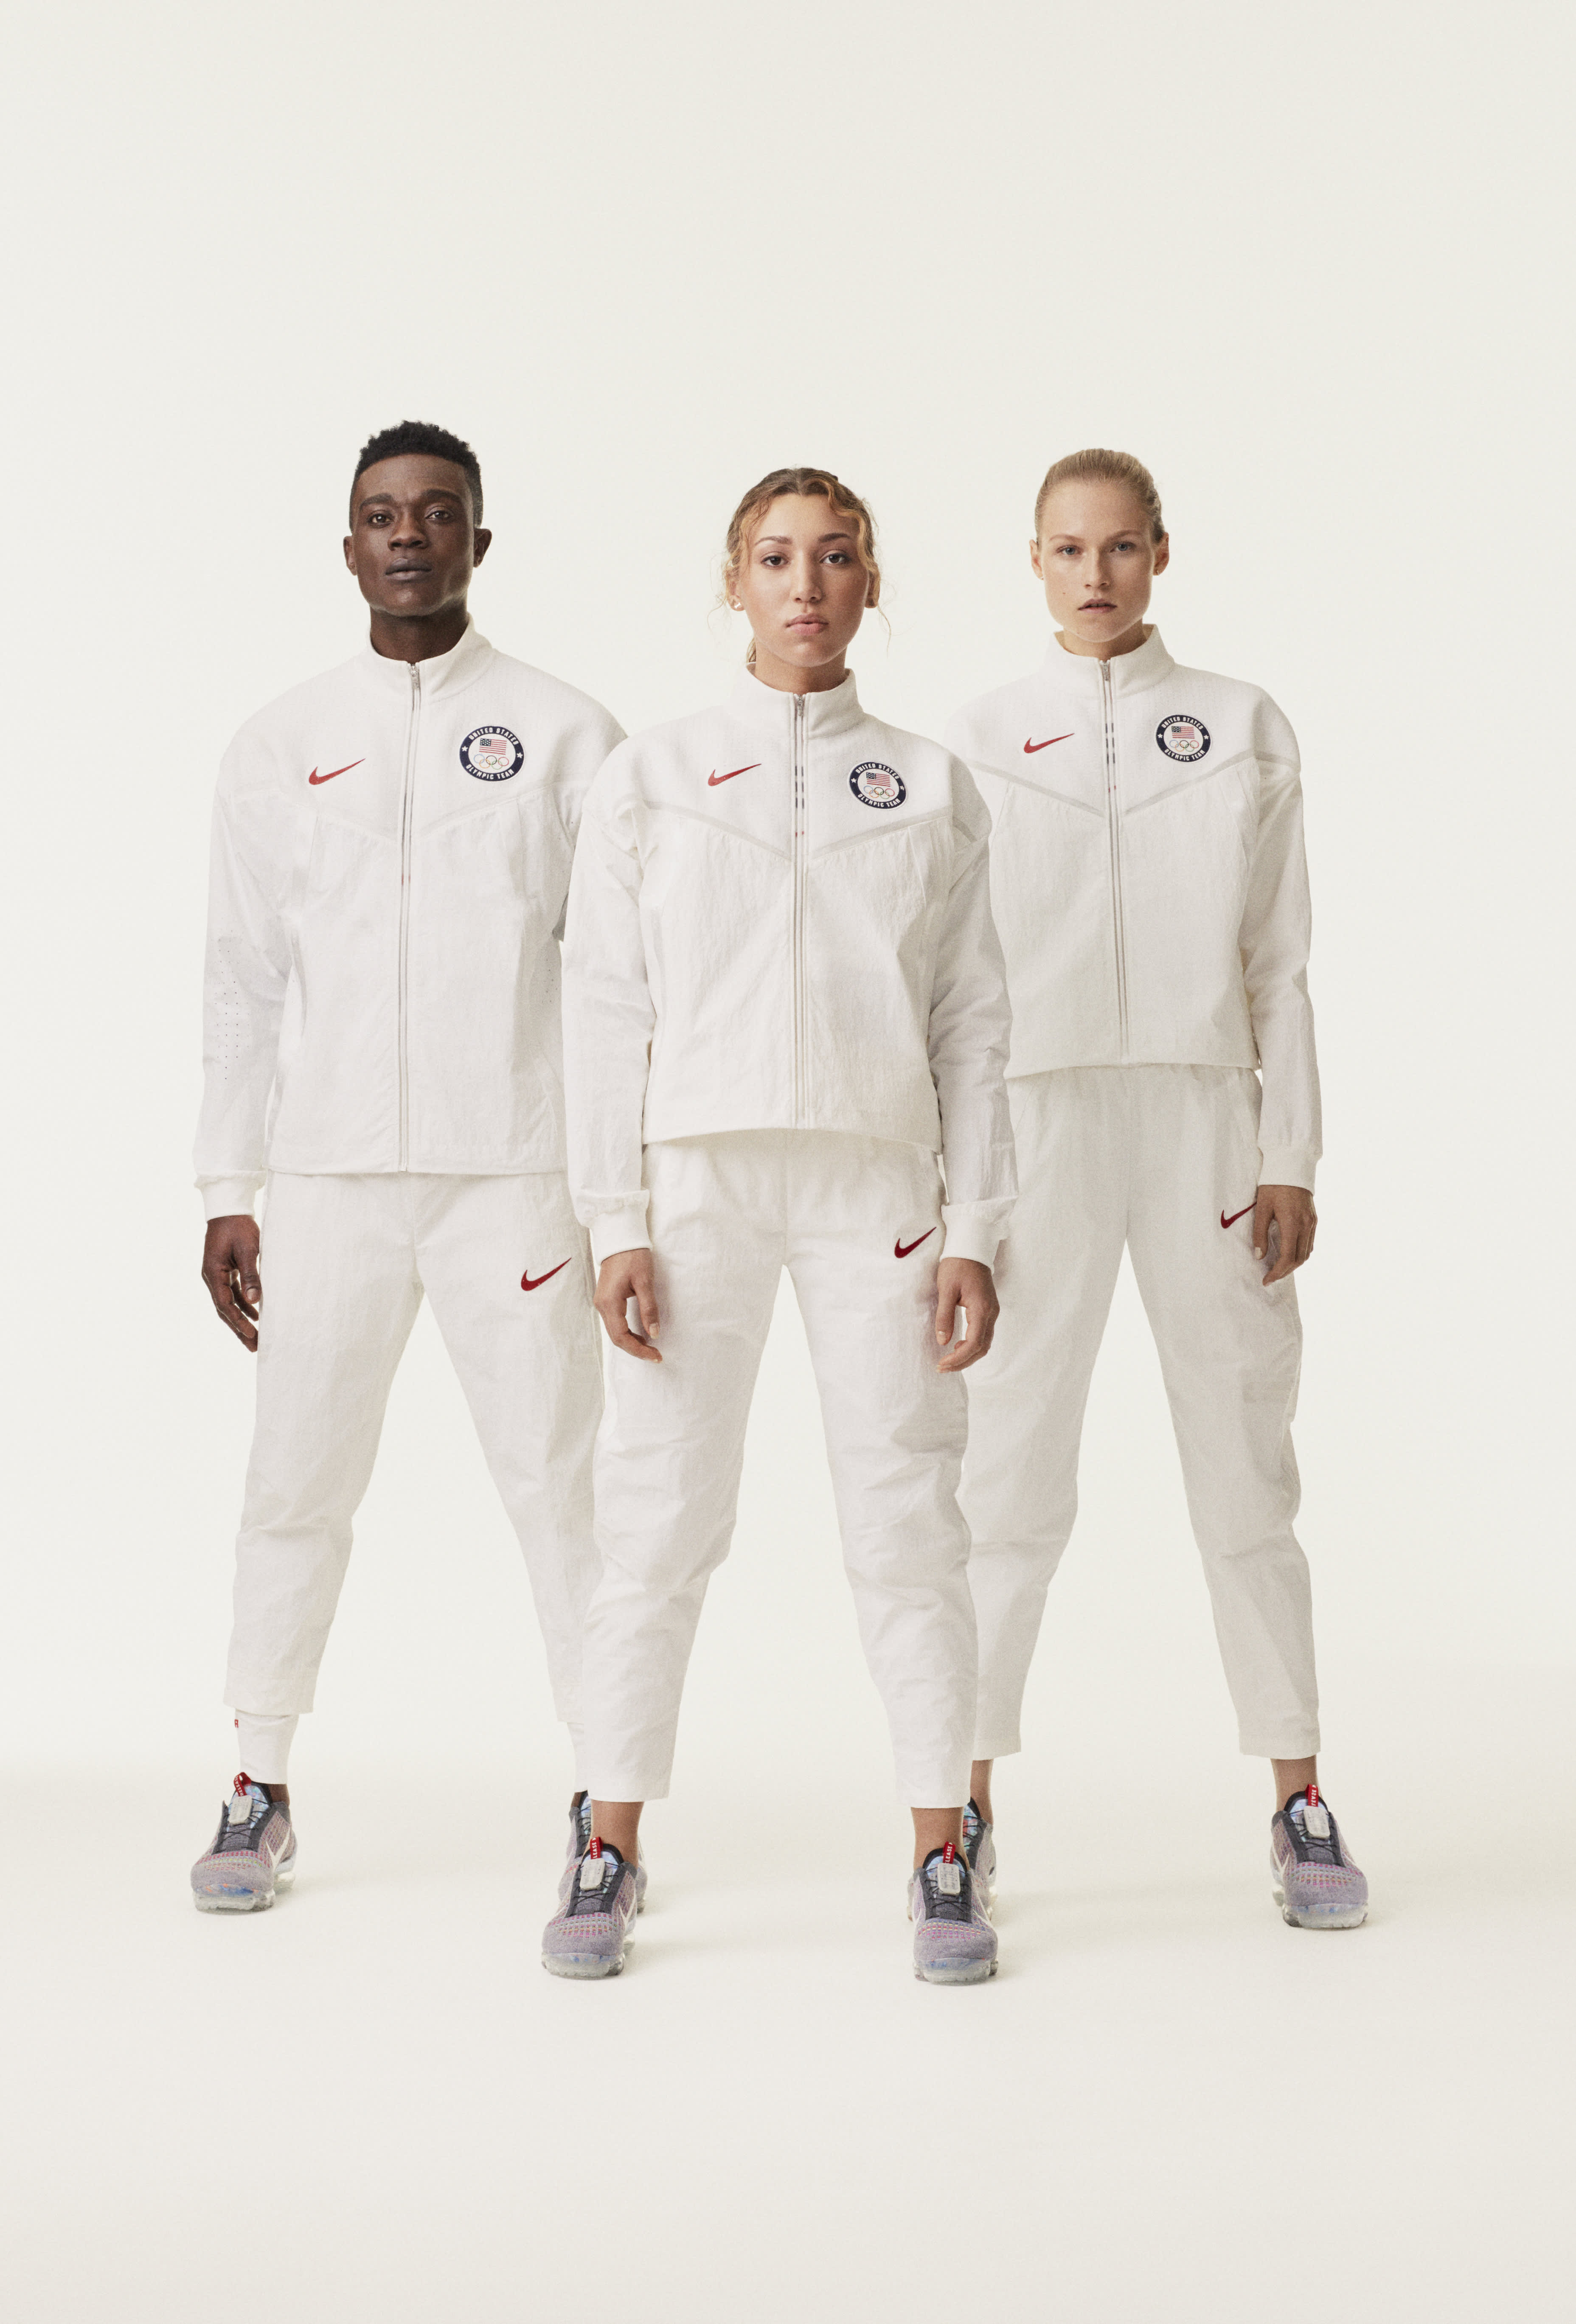 This is What Nike Athletes Will Be Wearing on the Podium - WearTesters